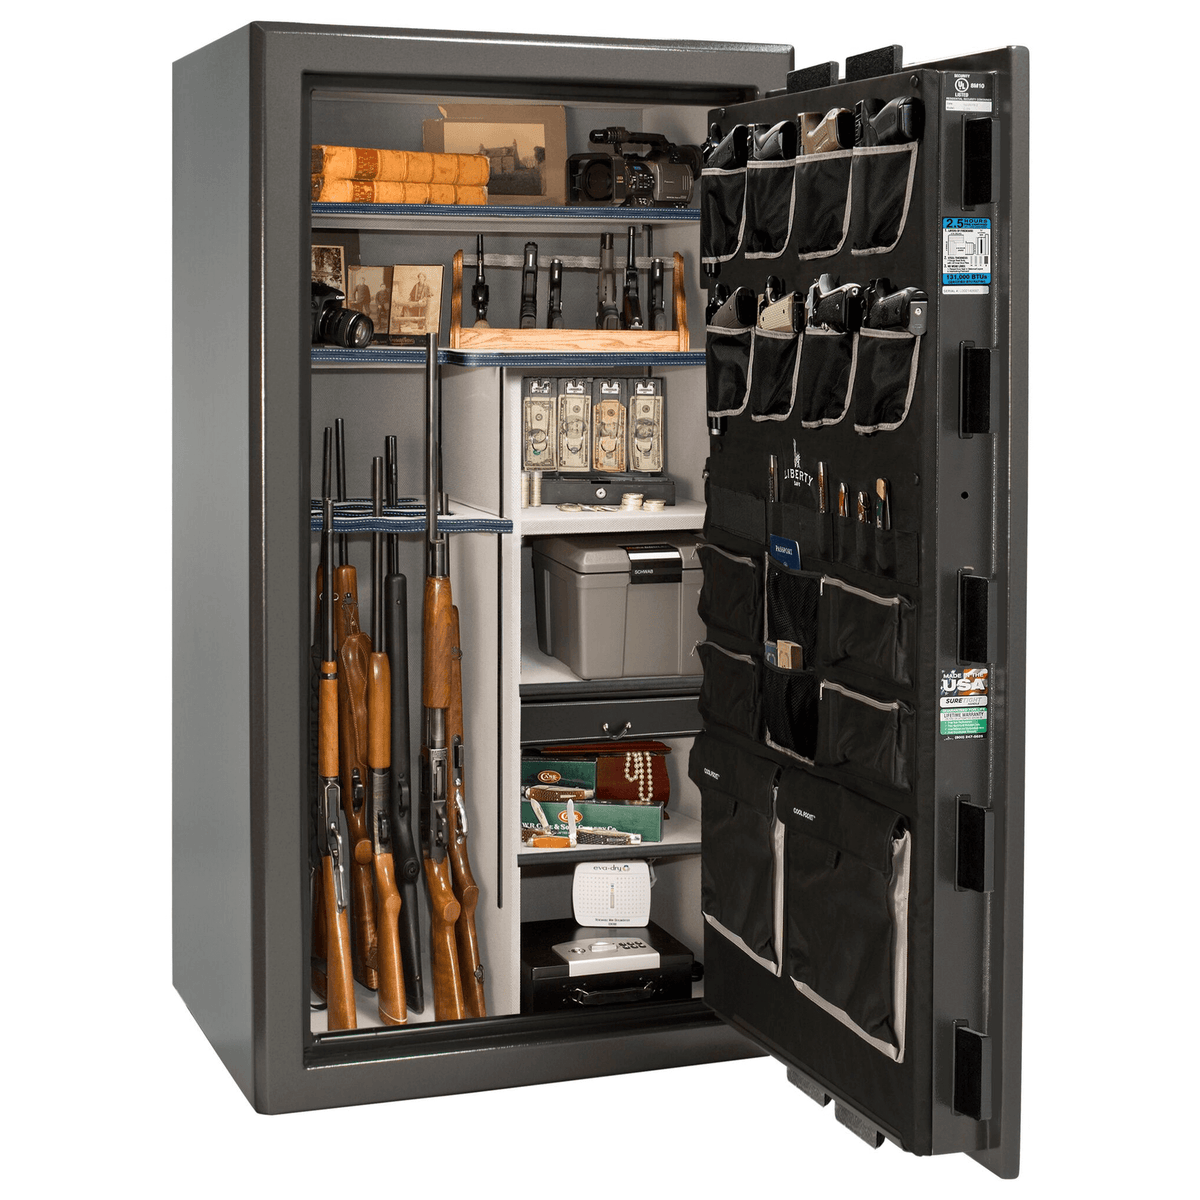 Presidential Series | Level 8 Security | 2.5 Hours Fire Protection | 40 | Dimensions: 66.5&quot;(H) x 36.25&quot;(W) x 32&quot;(D) | Gray Marble | Black Chrome Hardware | Electronic Lock